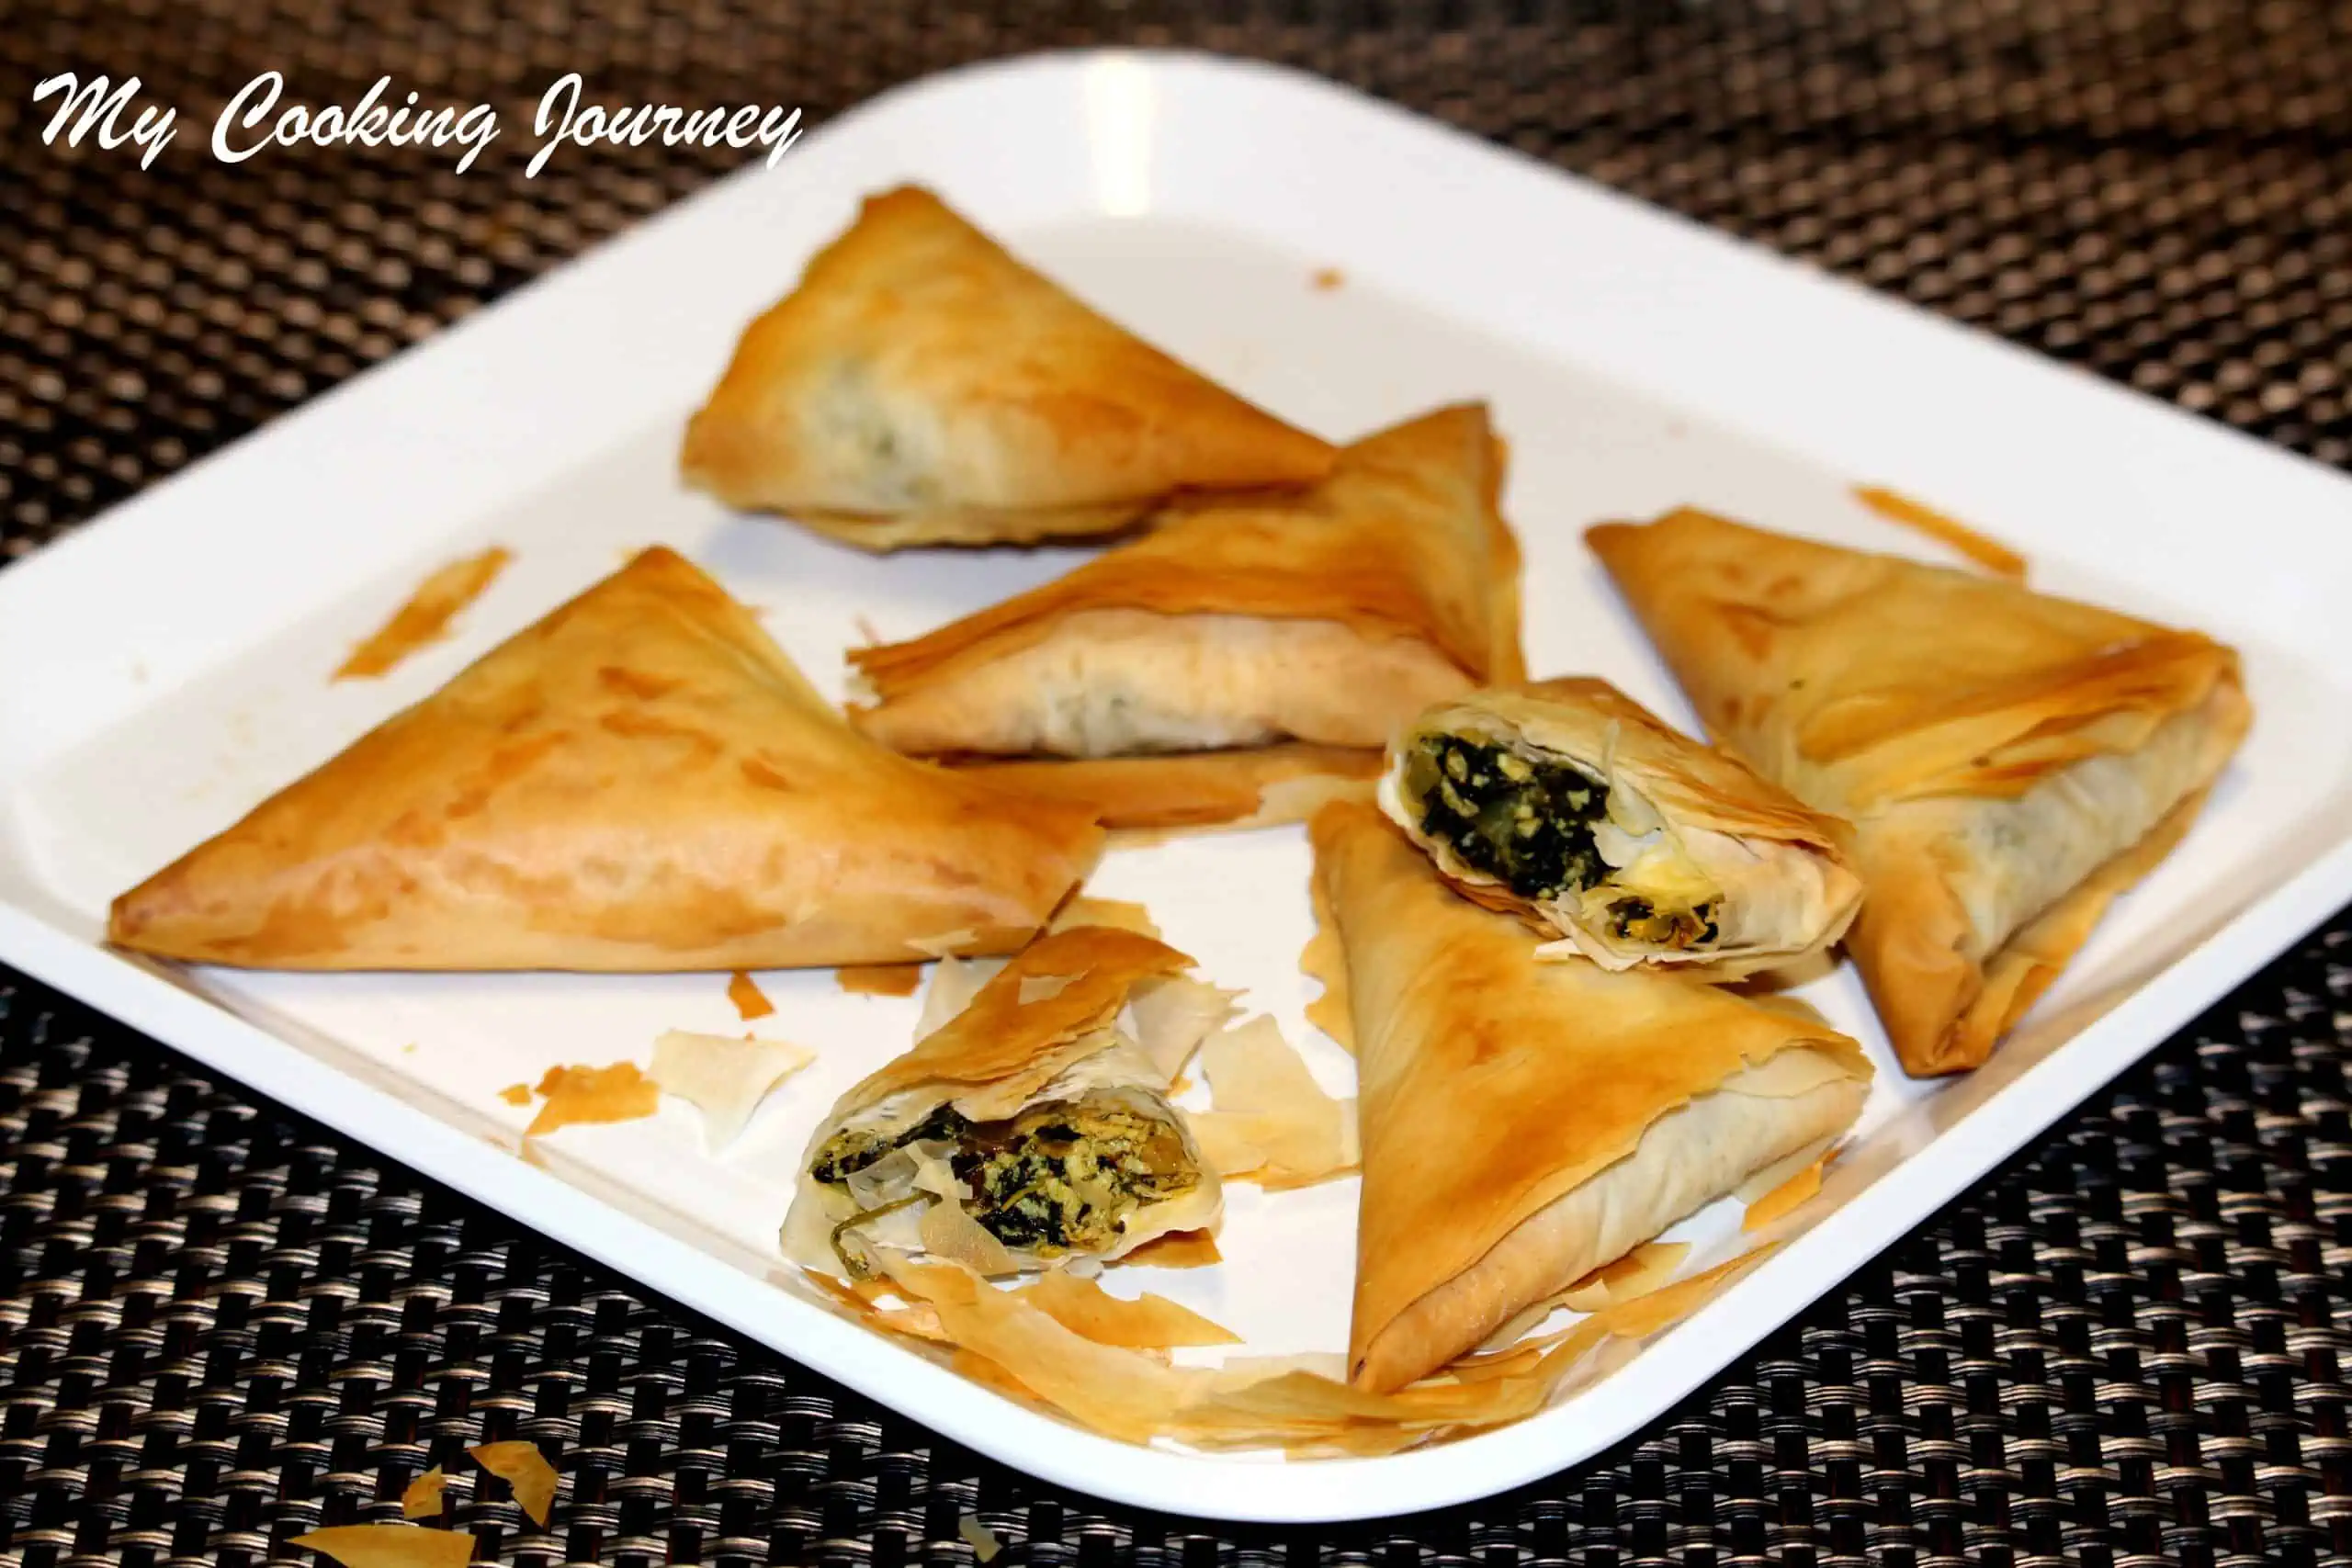 Spinach and Paneer Samosa in a plate